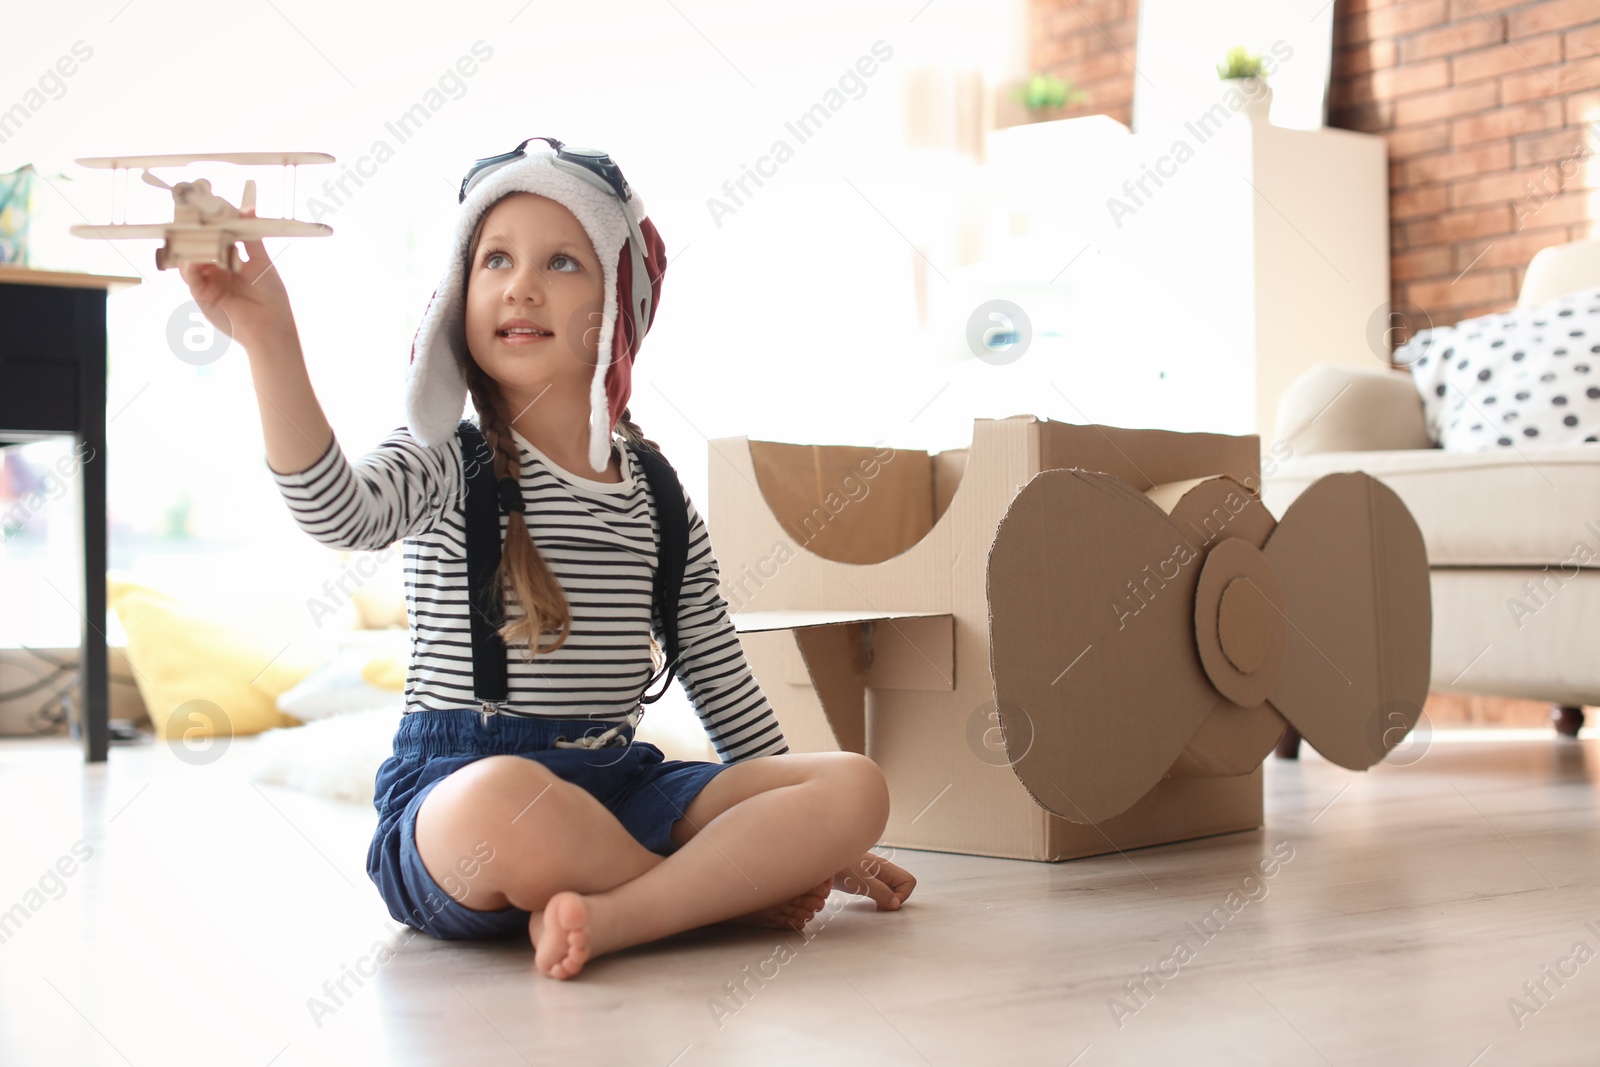 Photo of Adorable little child playing with toy plane at home